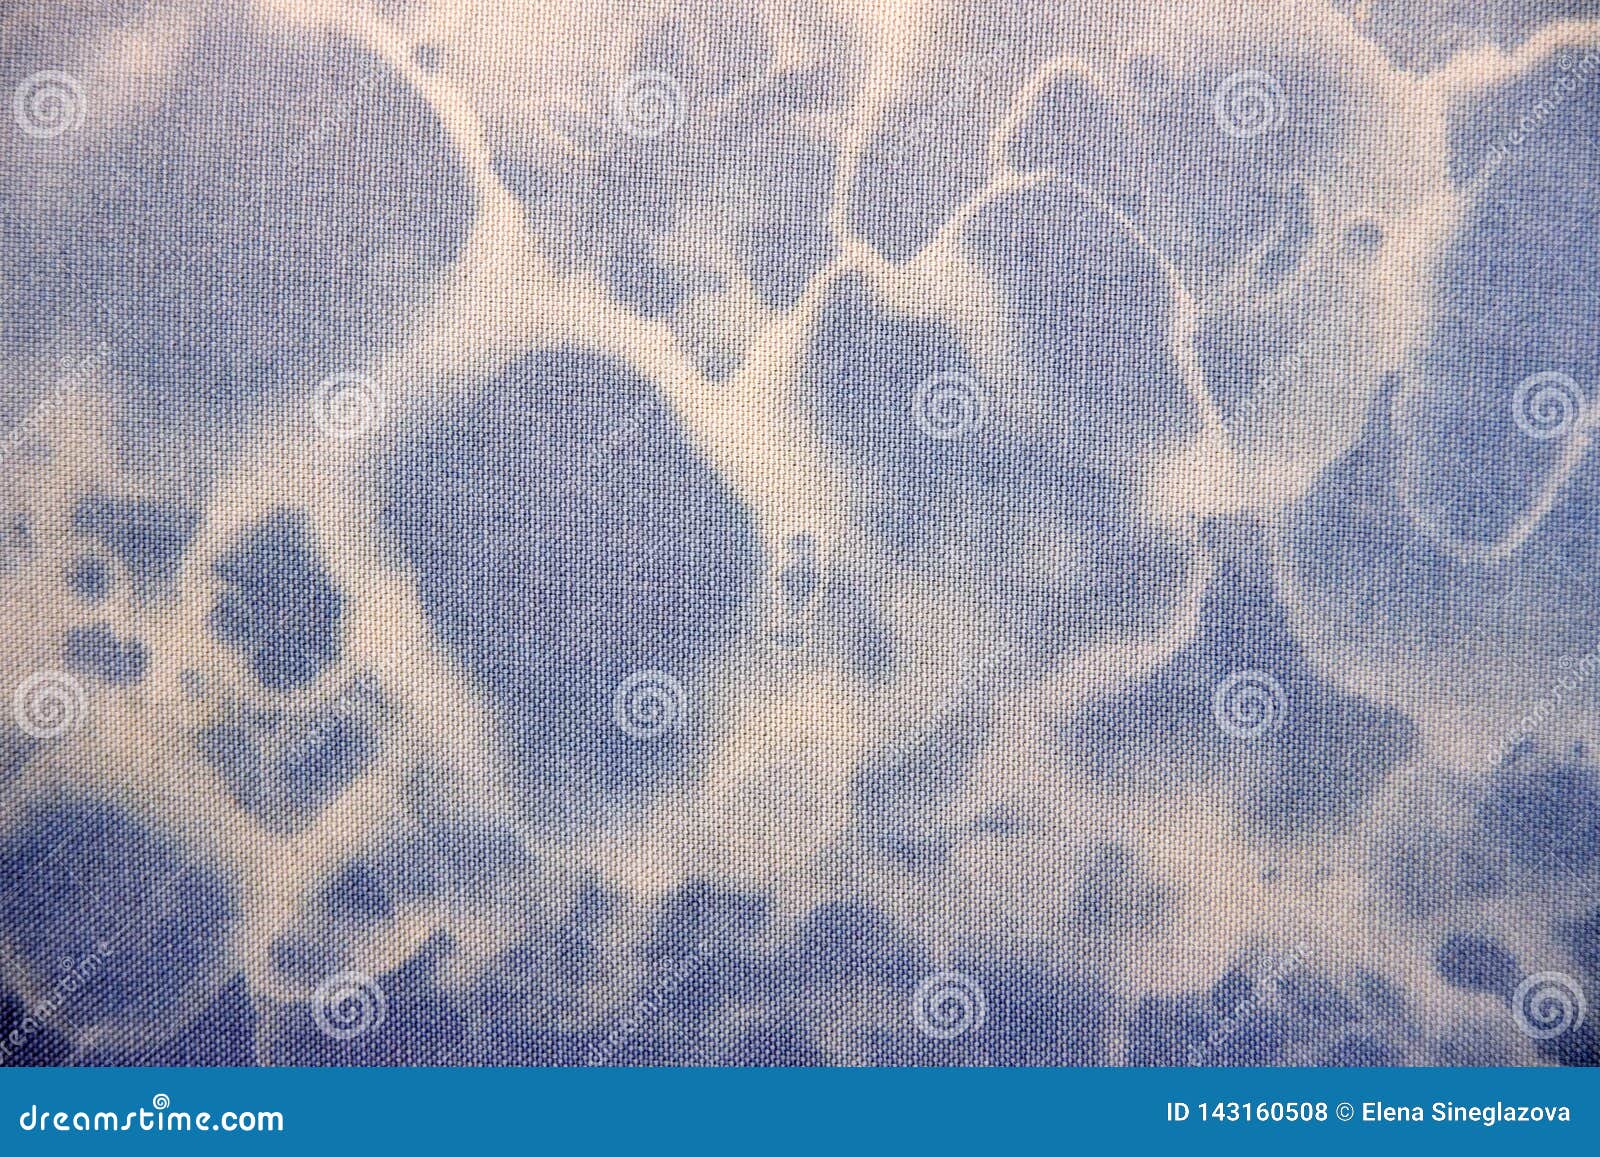 blue fabric textur with white circles.